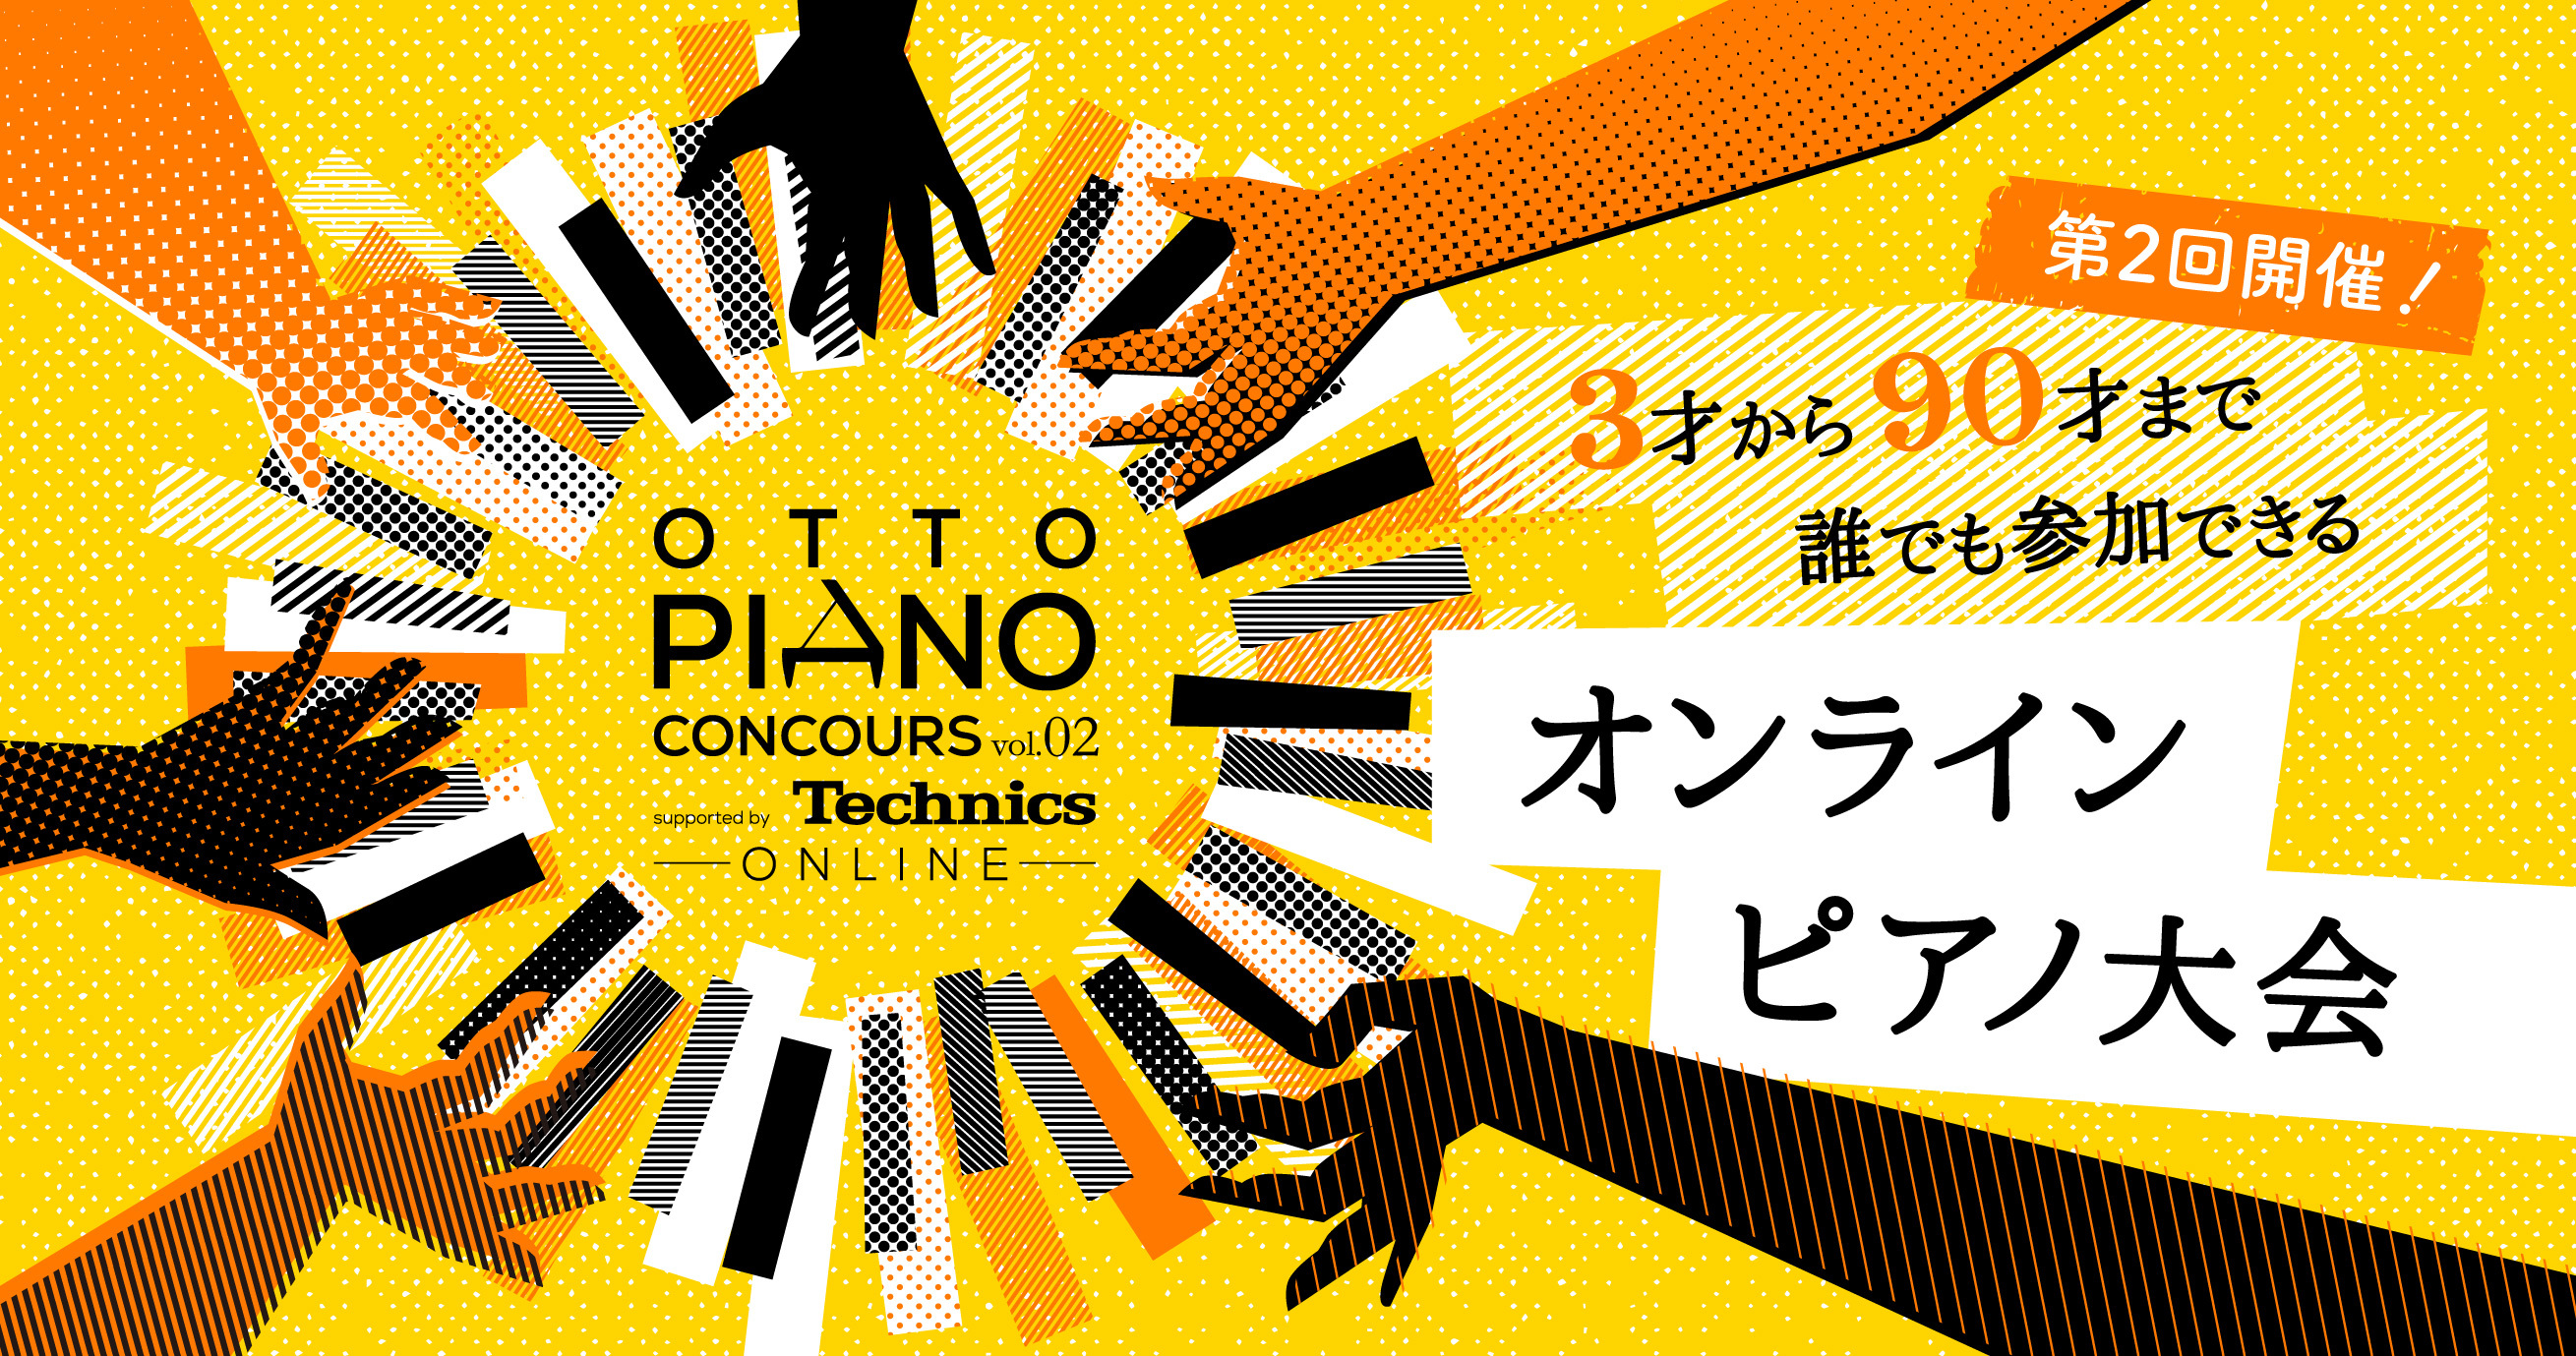 otto piano Concours vol.02 supported by Technics